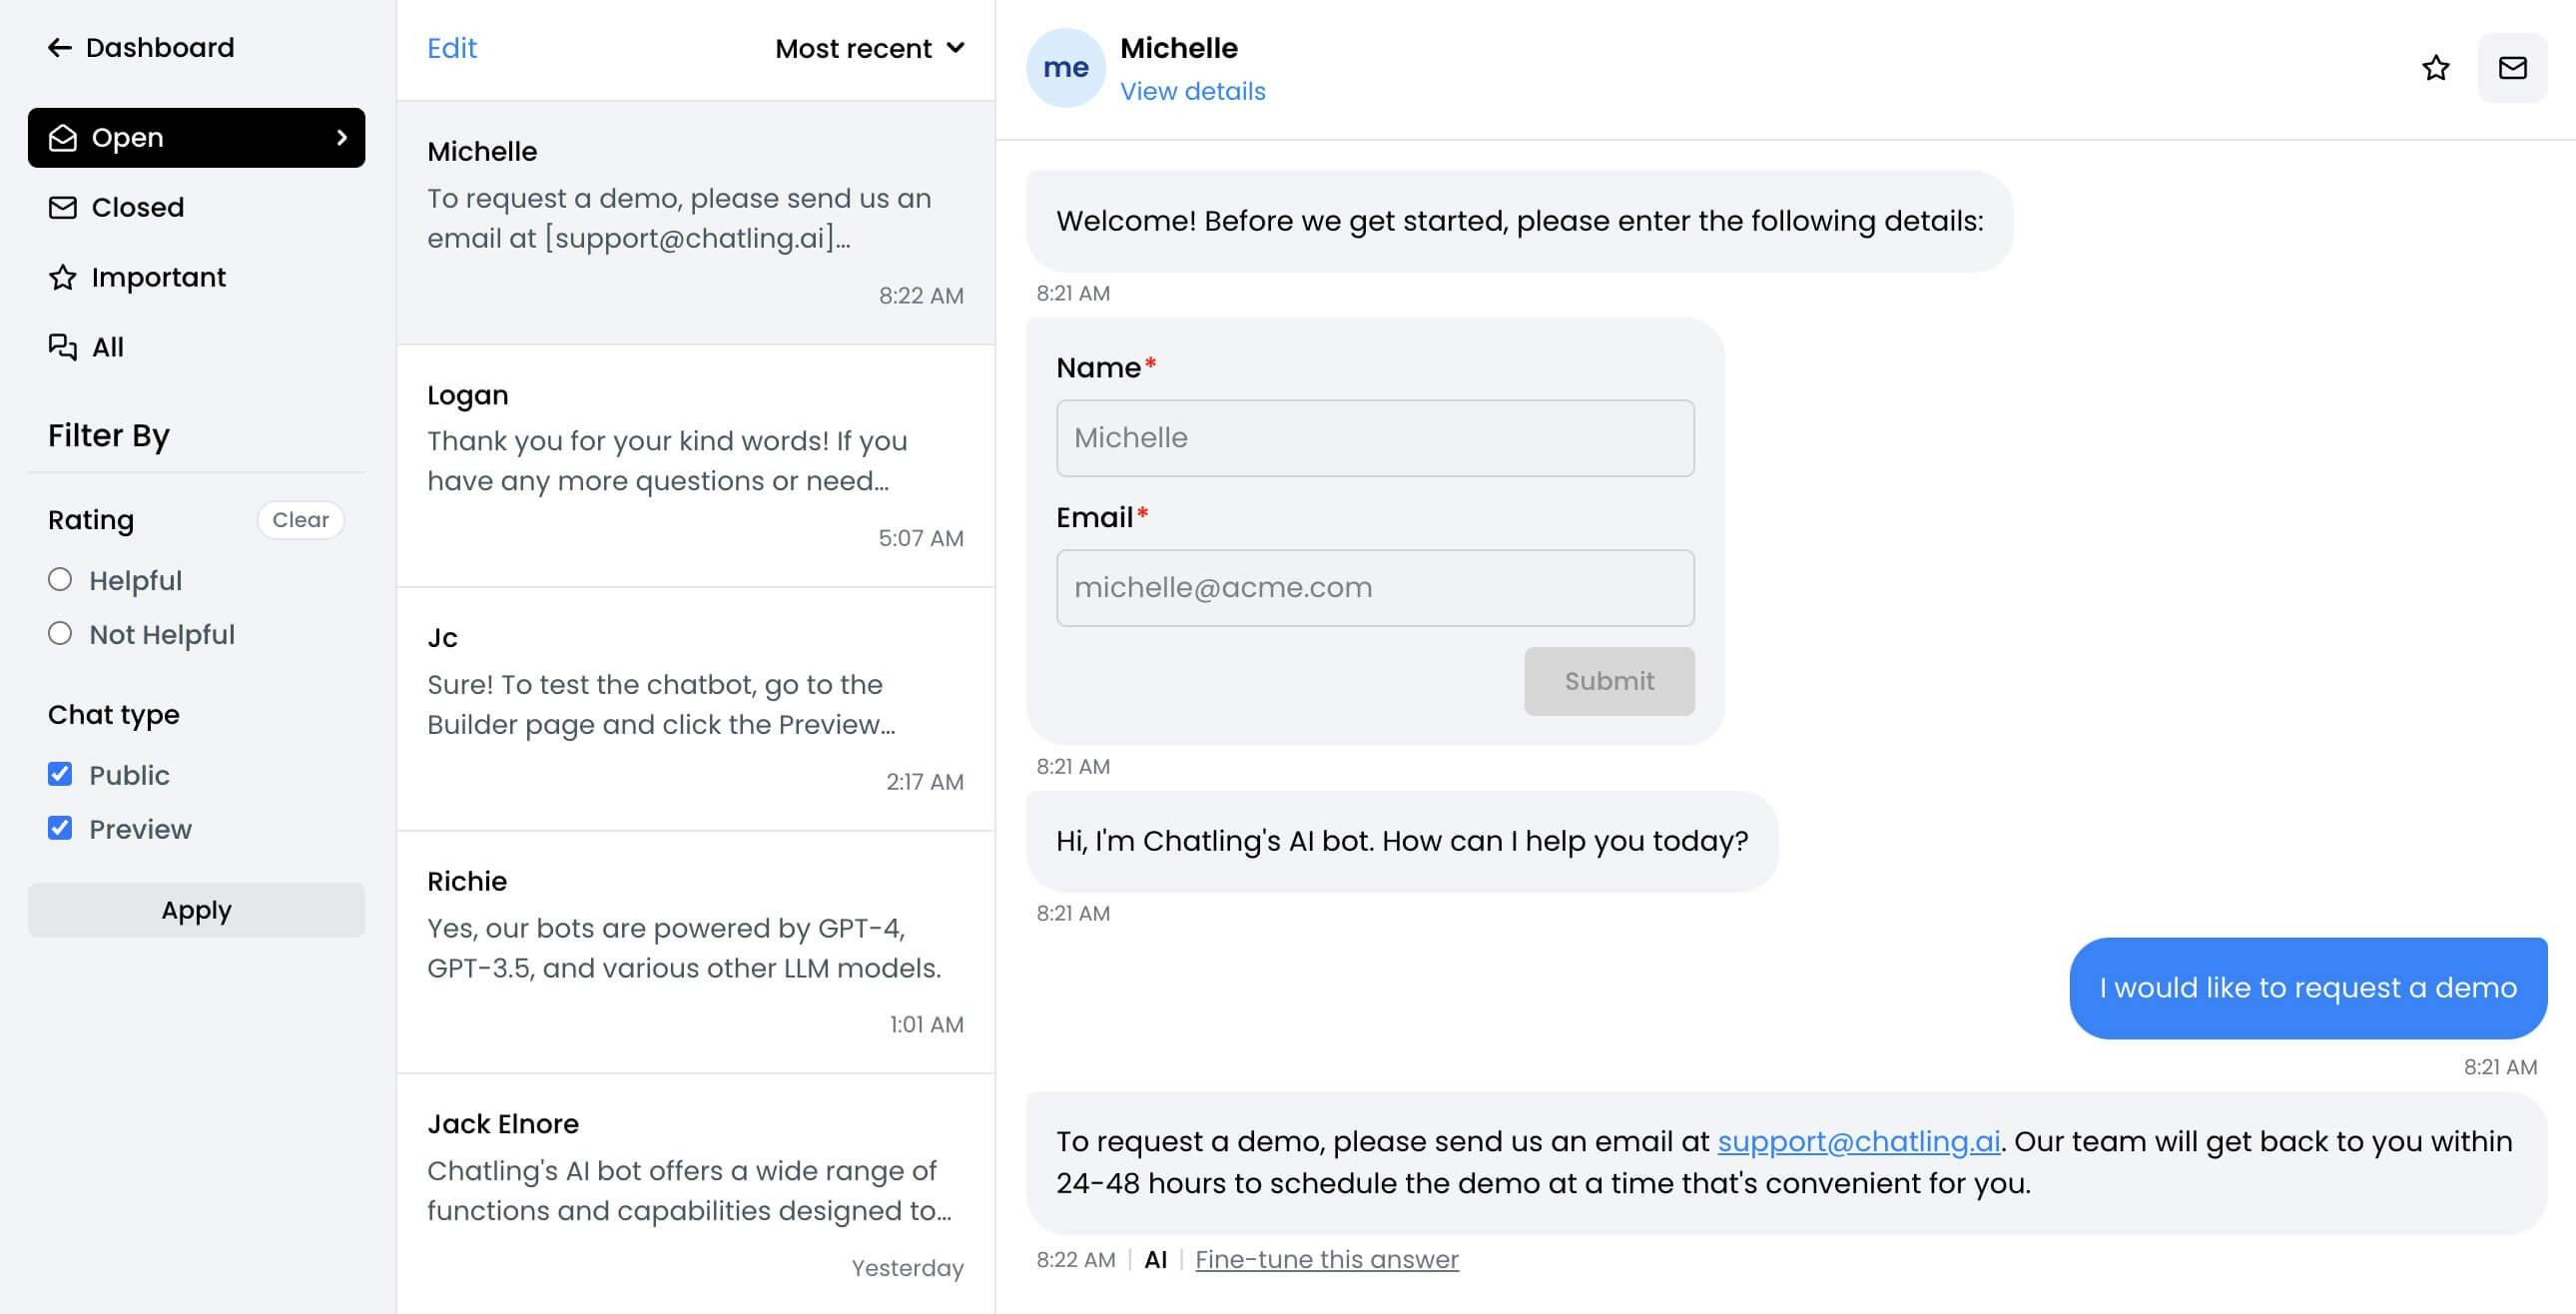 Monitor chatbot's conversations and fine-tune AI responses